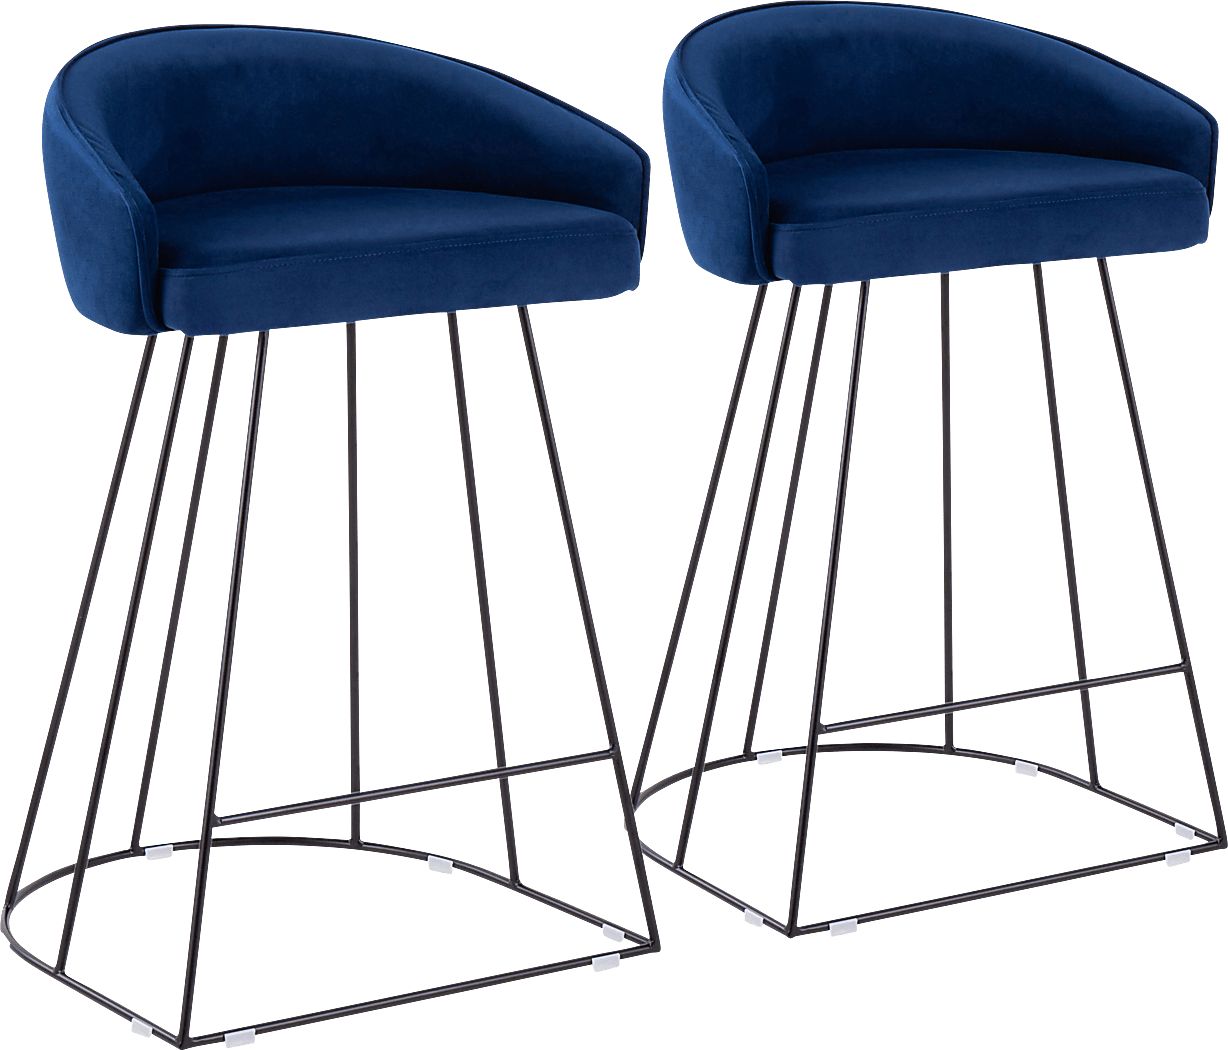 Barstools & Counter Height Stools for Sale